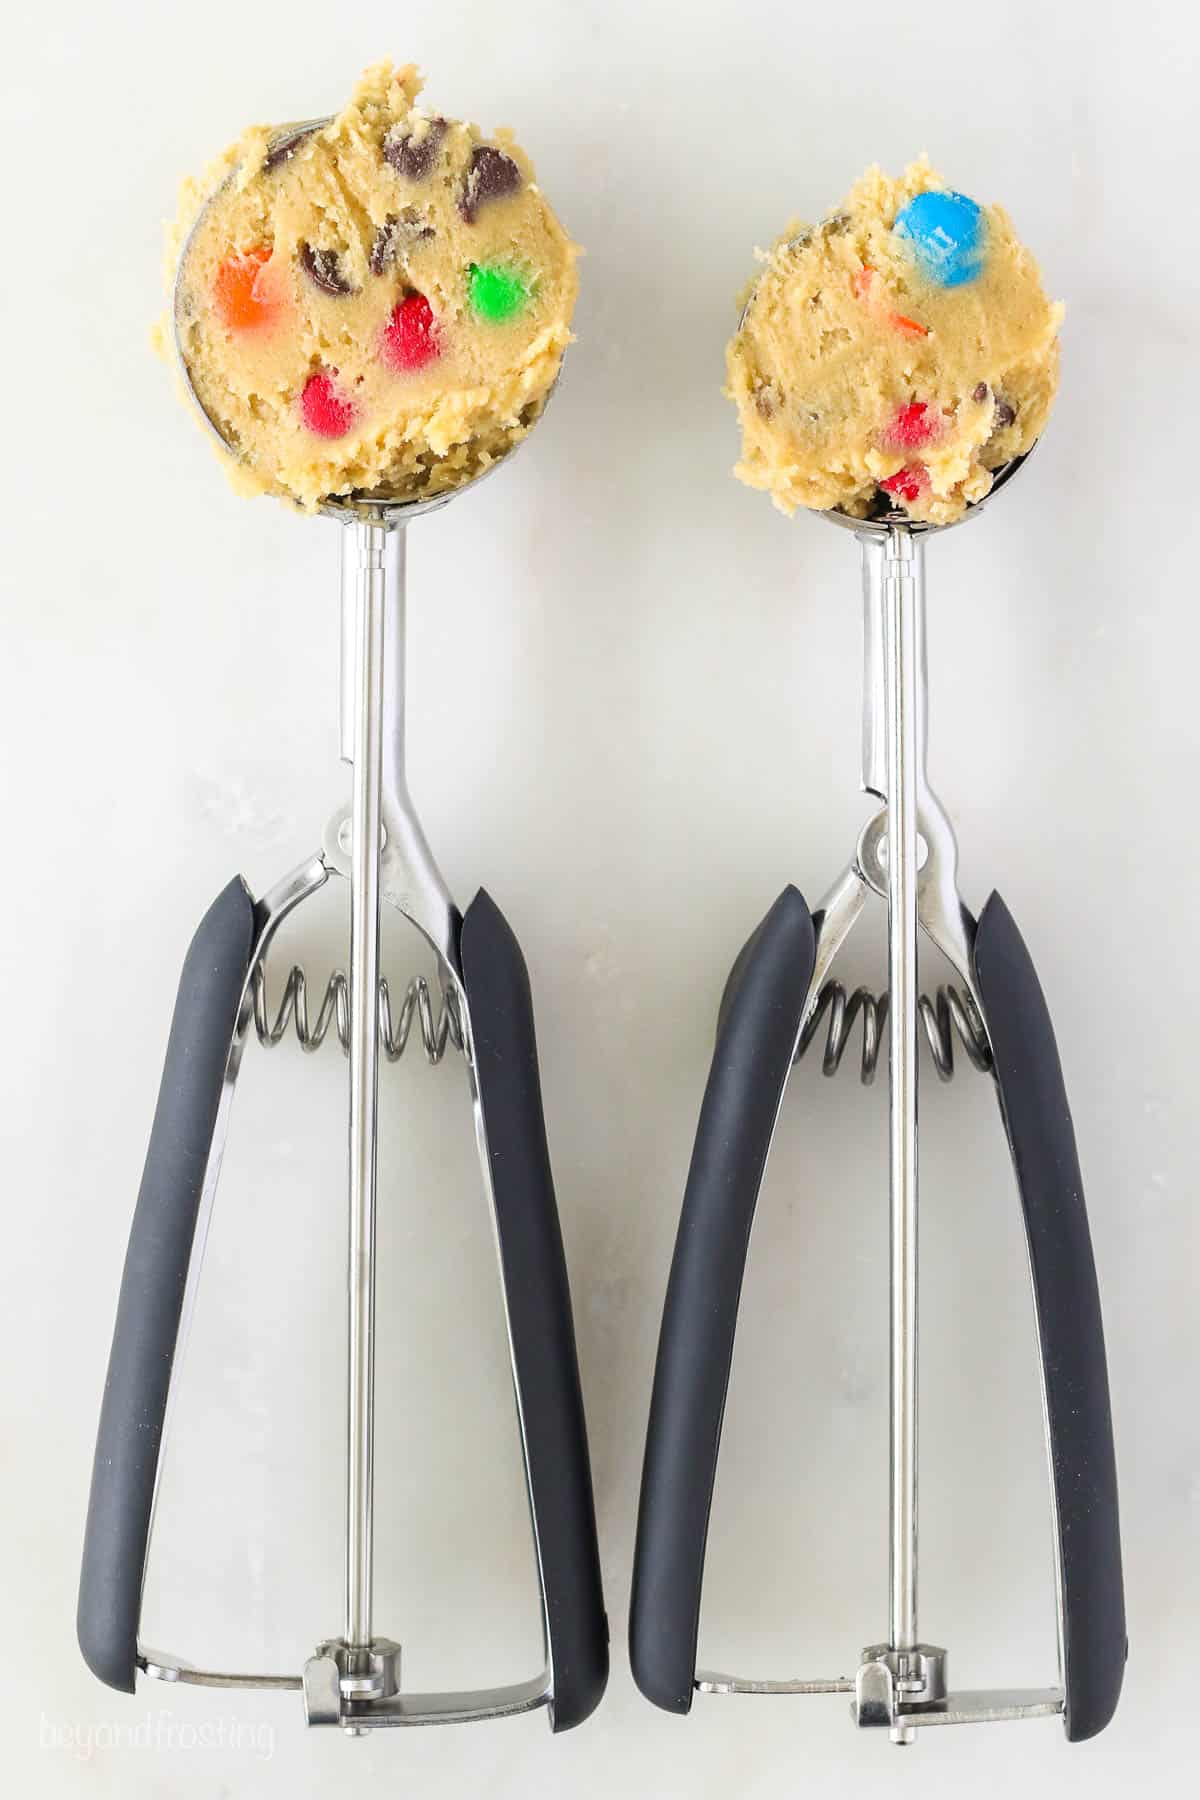 Medium and large cookie scoops of dough